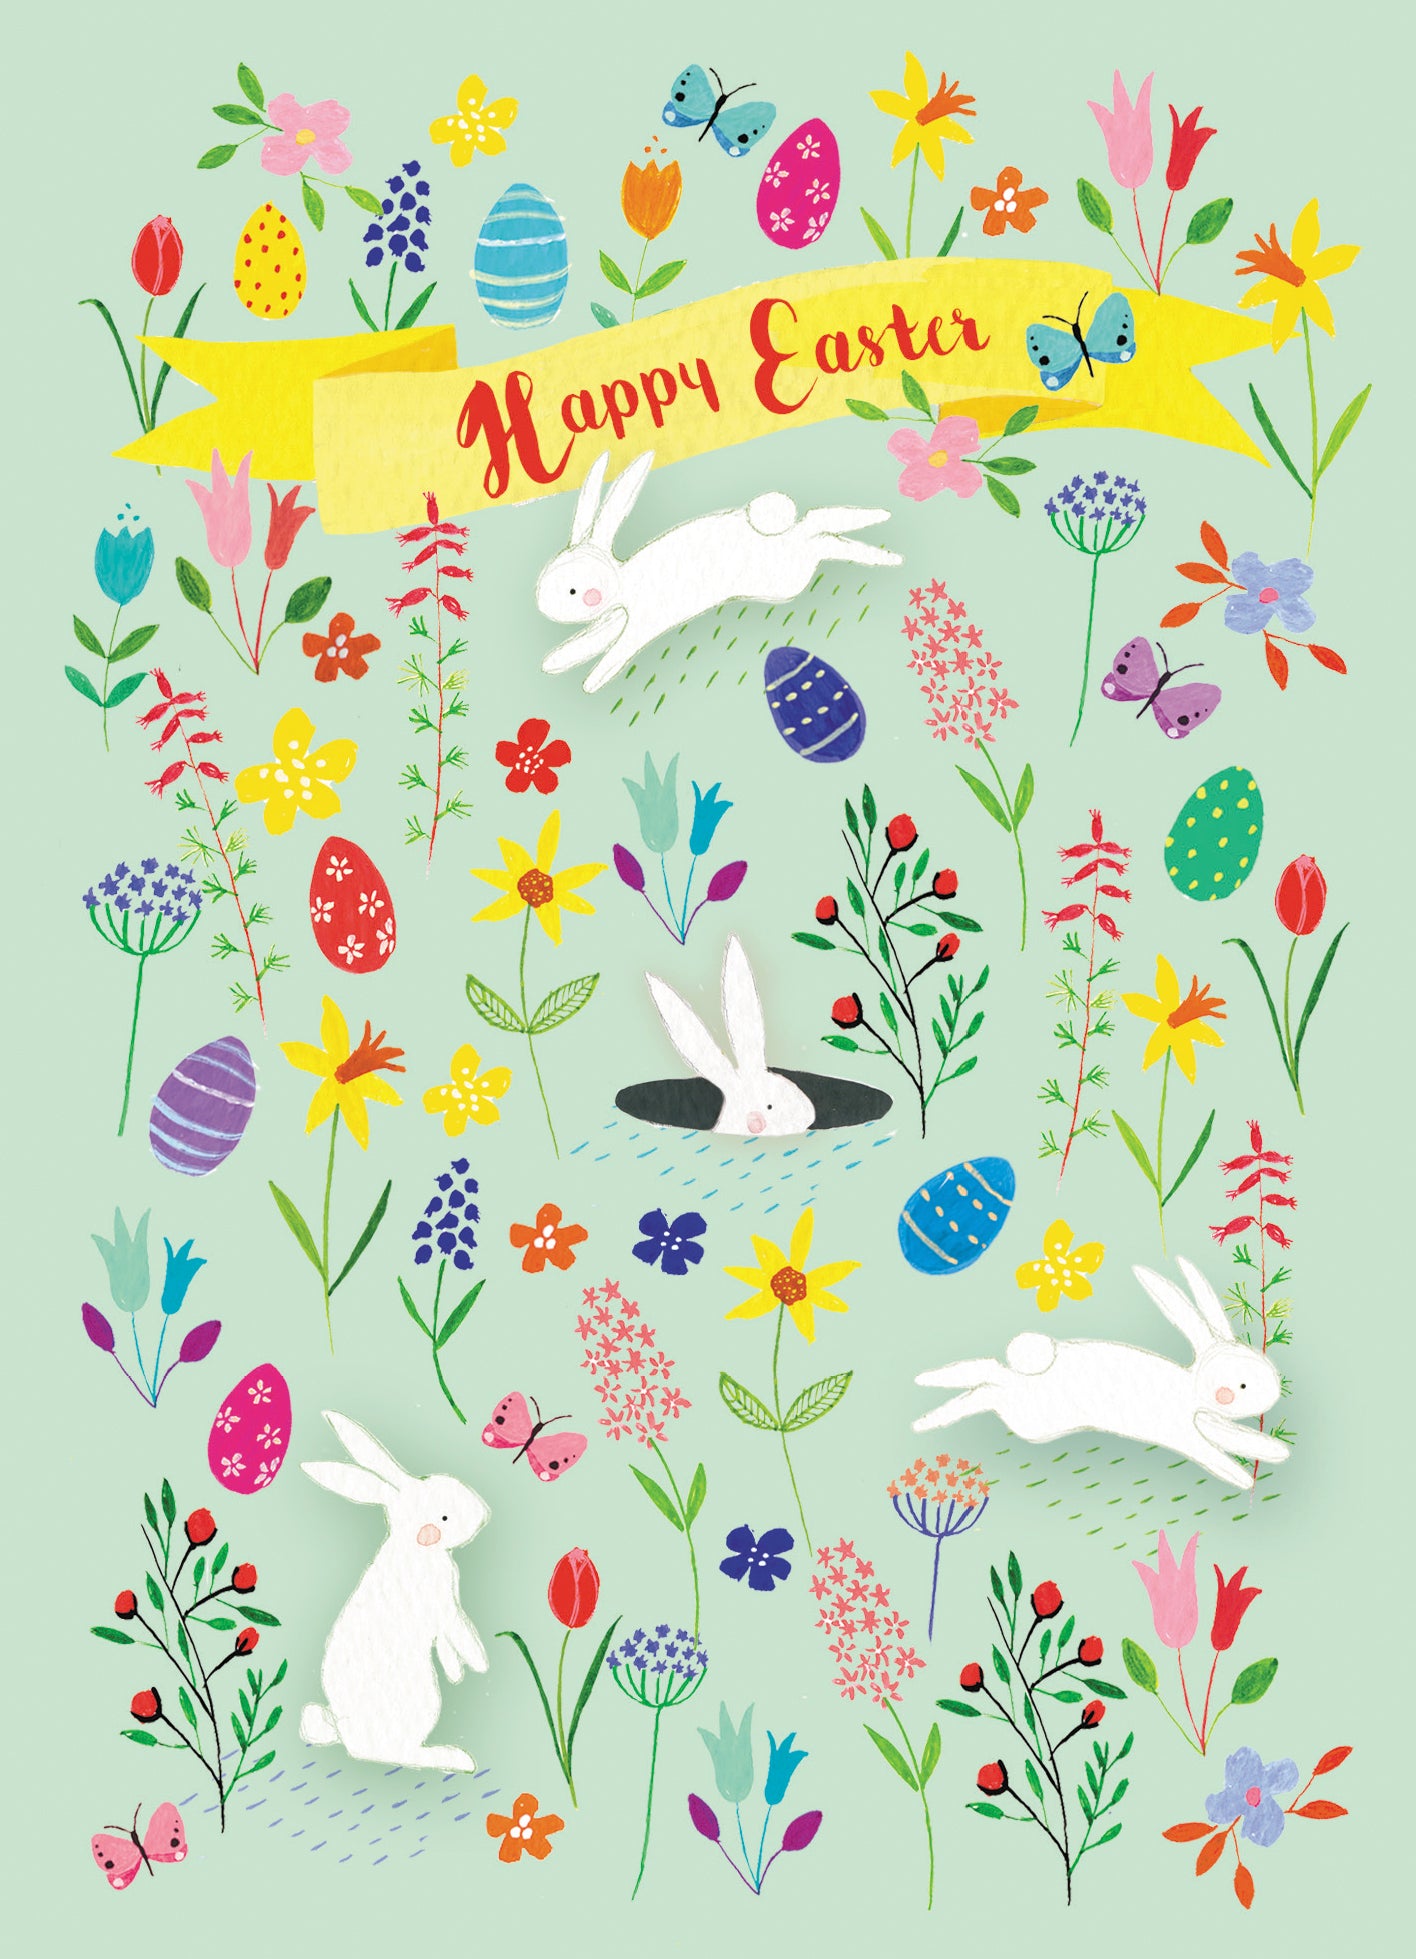 Happy Easter Jumping Bunny In A Meadow Traditional Greeting Card